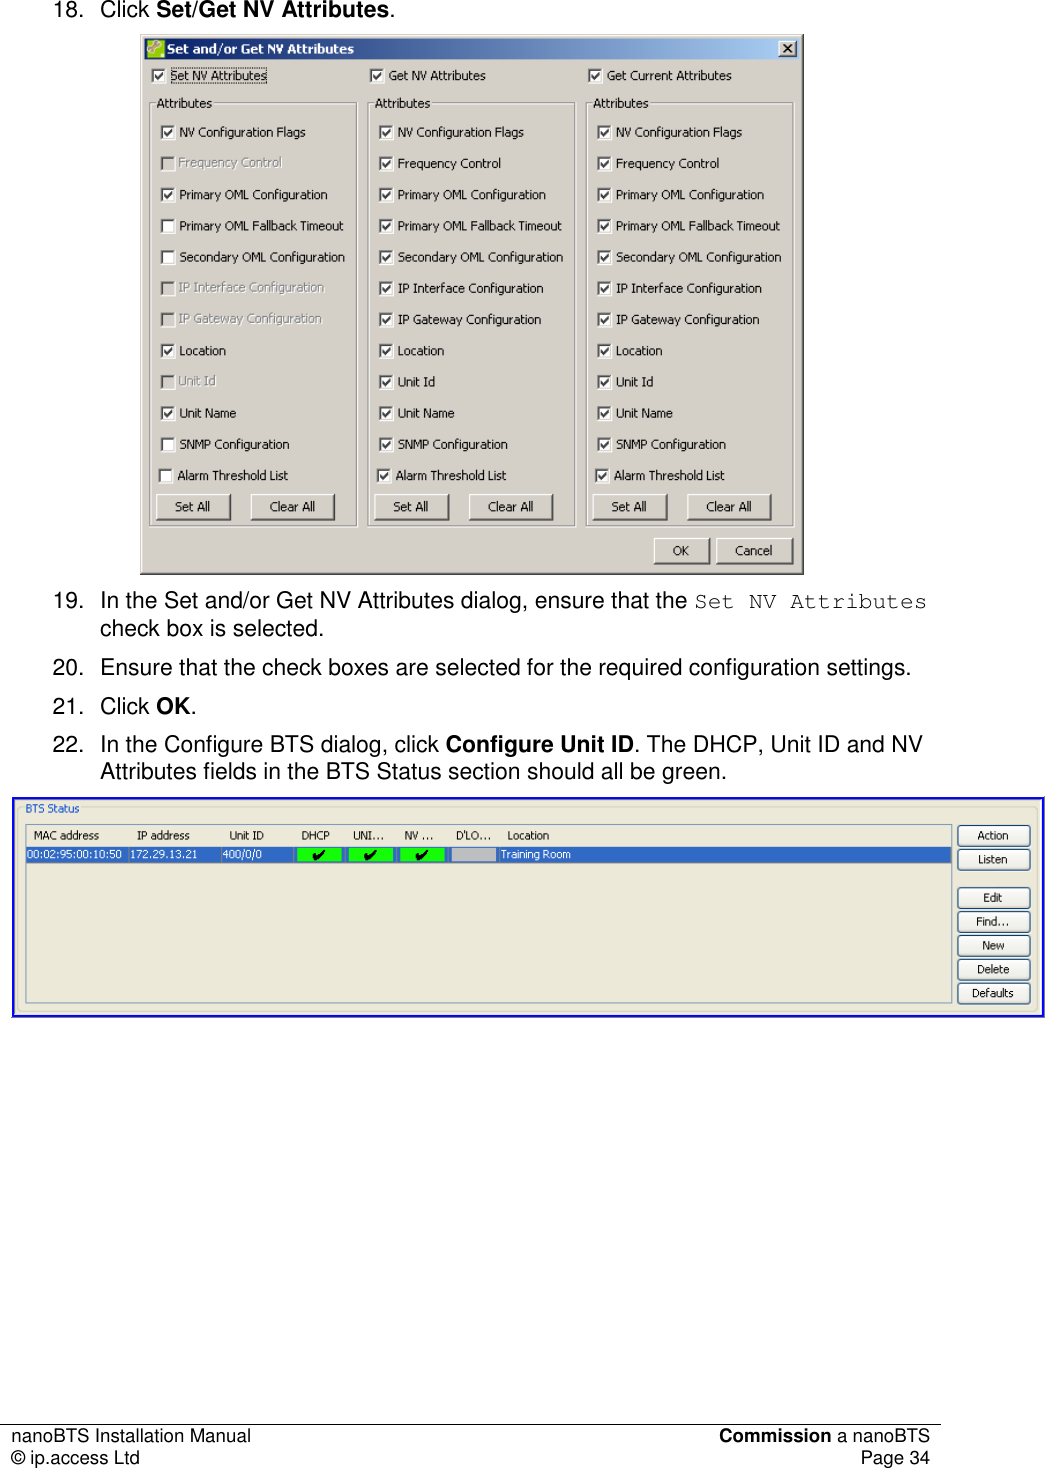 nanoBTS Installation Manual  Commission a nanoBTS © ip.access Ltd  Page 34  18.  Click Set/Get NV Attributes.  19.  In the Set and/or Get NV Attributes dialog, ensure that the Set NV Attributes check box is selected. 20.  Ensure that the check boxes are selected for the required configuration settings. 21.  Click OK.  22.  In the Configure BTS dialog, click Configure Unit ID. The DHCP, Unit ID and NV Attributes fields in the BTS Status section should all be green.         